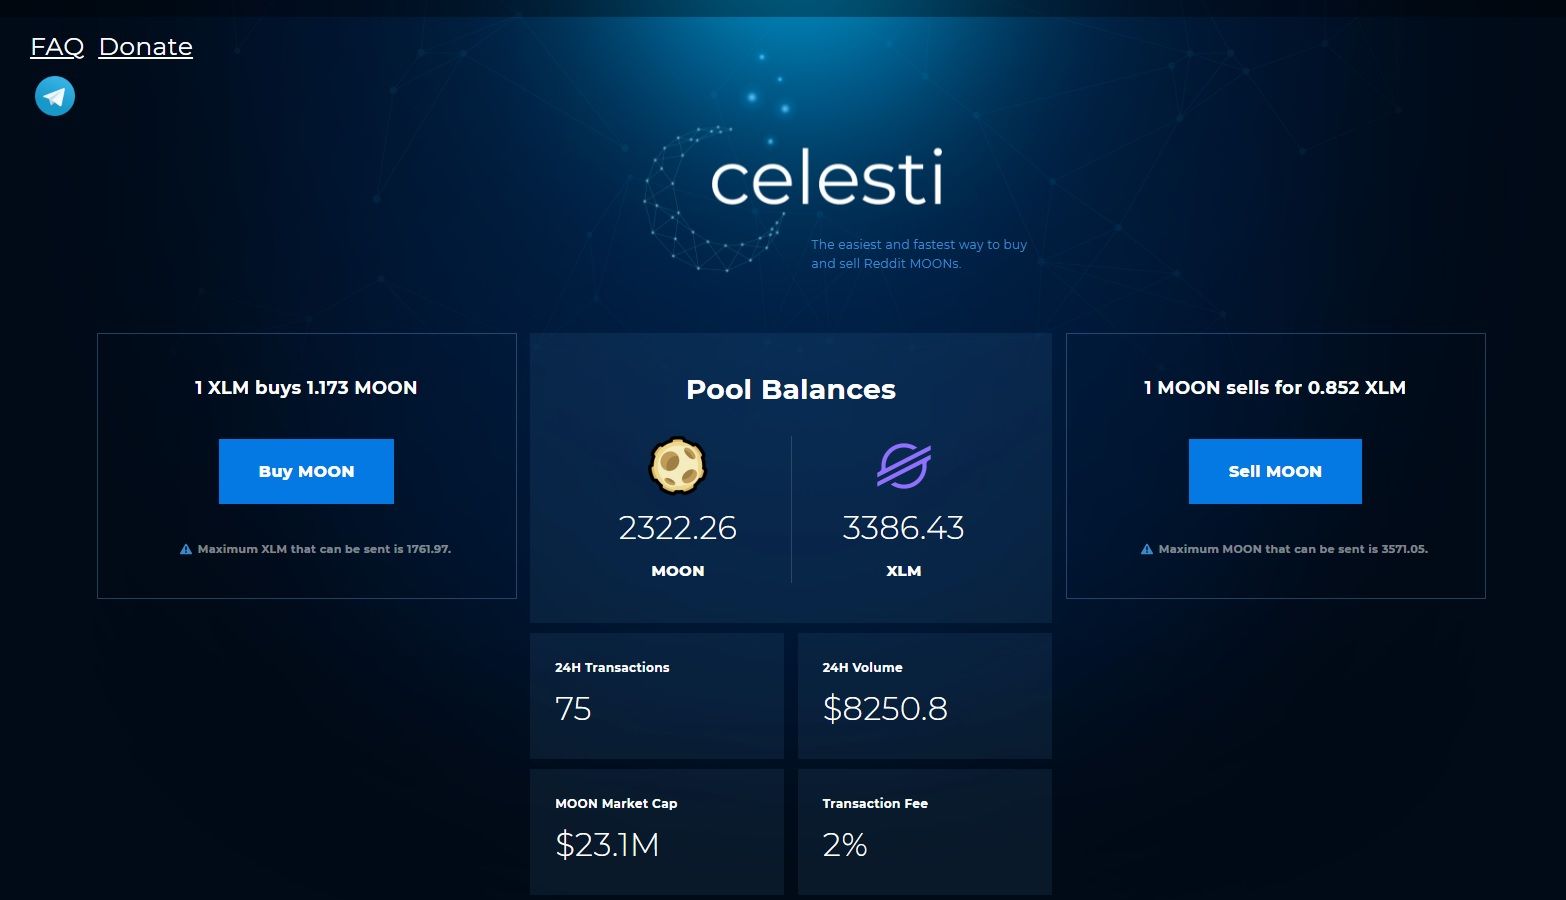 Celesti.trade to buy and sell Reddit MOONs